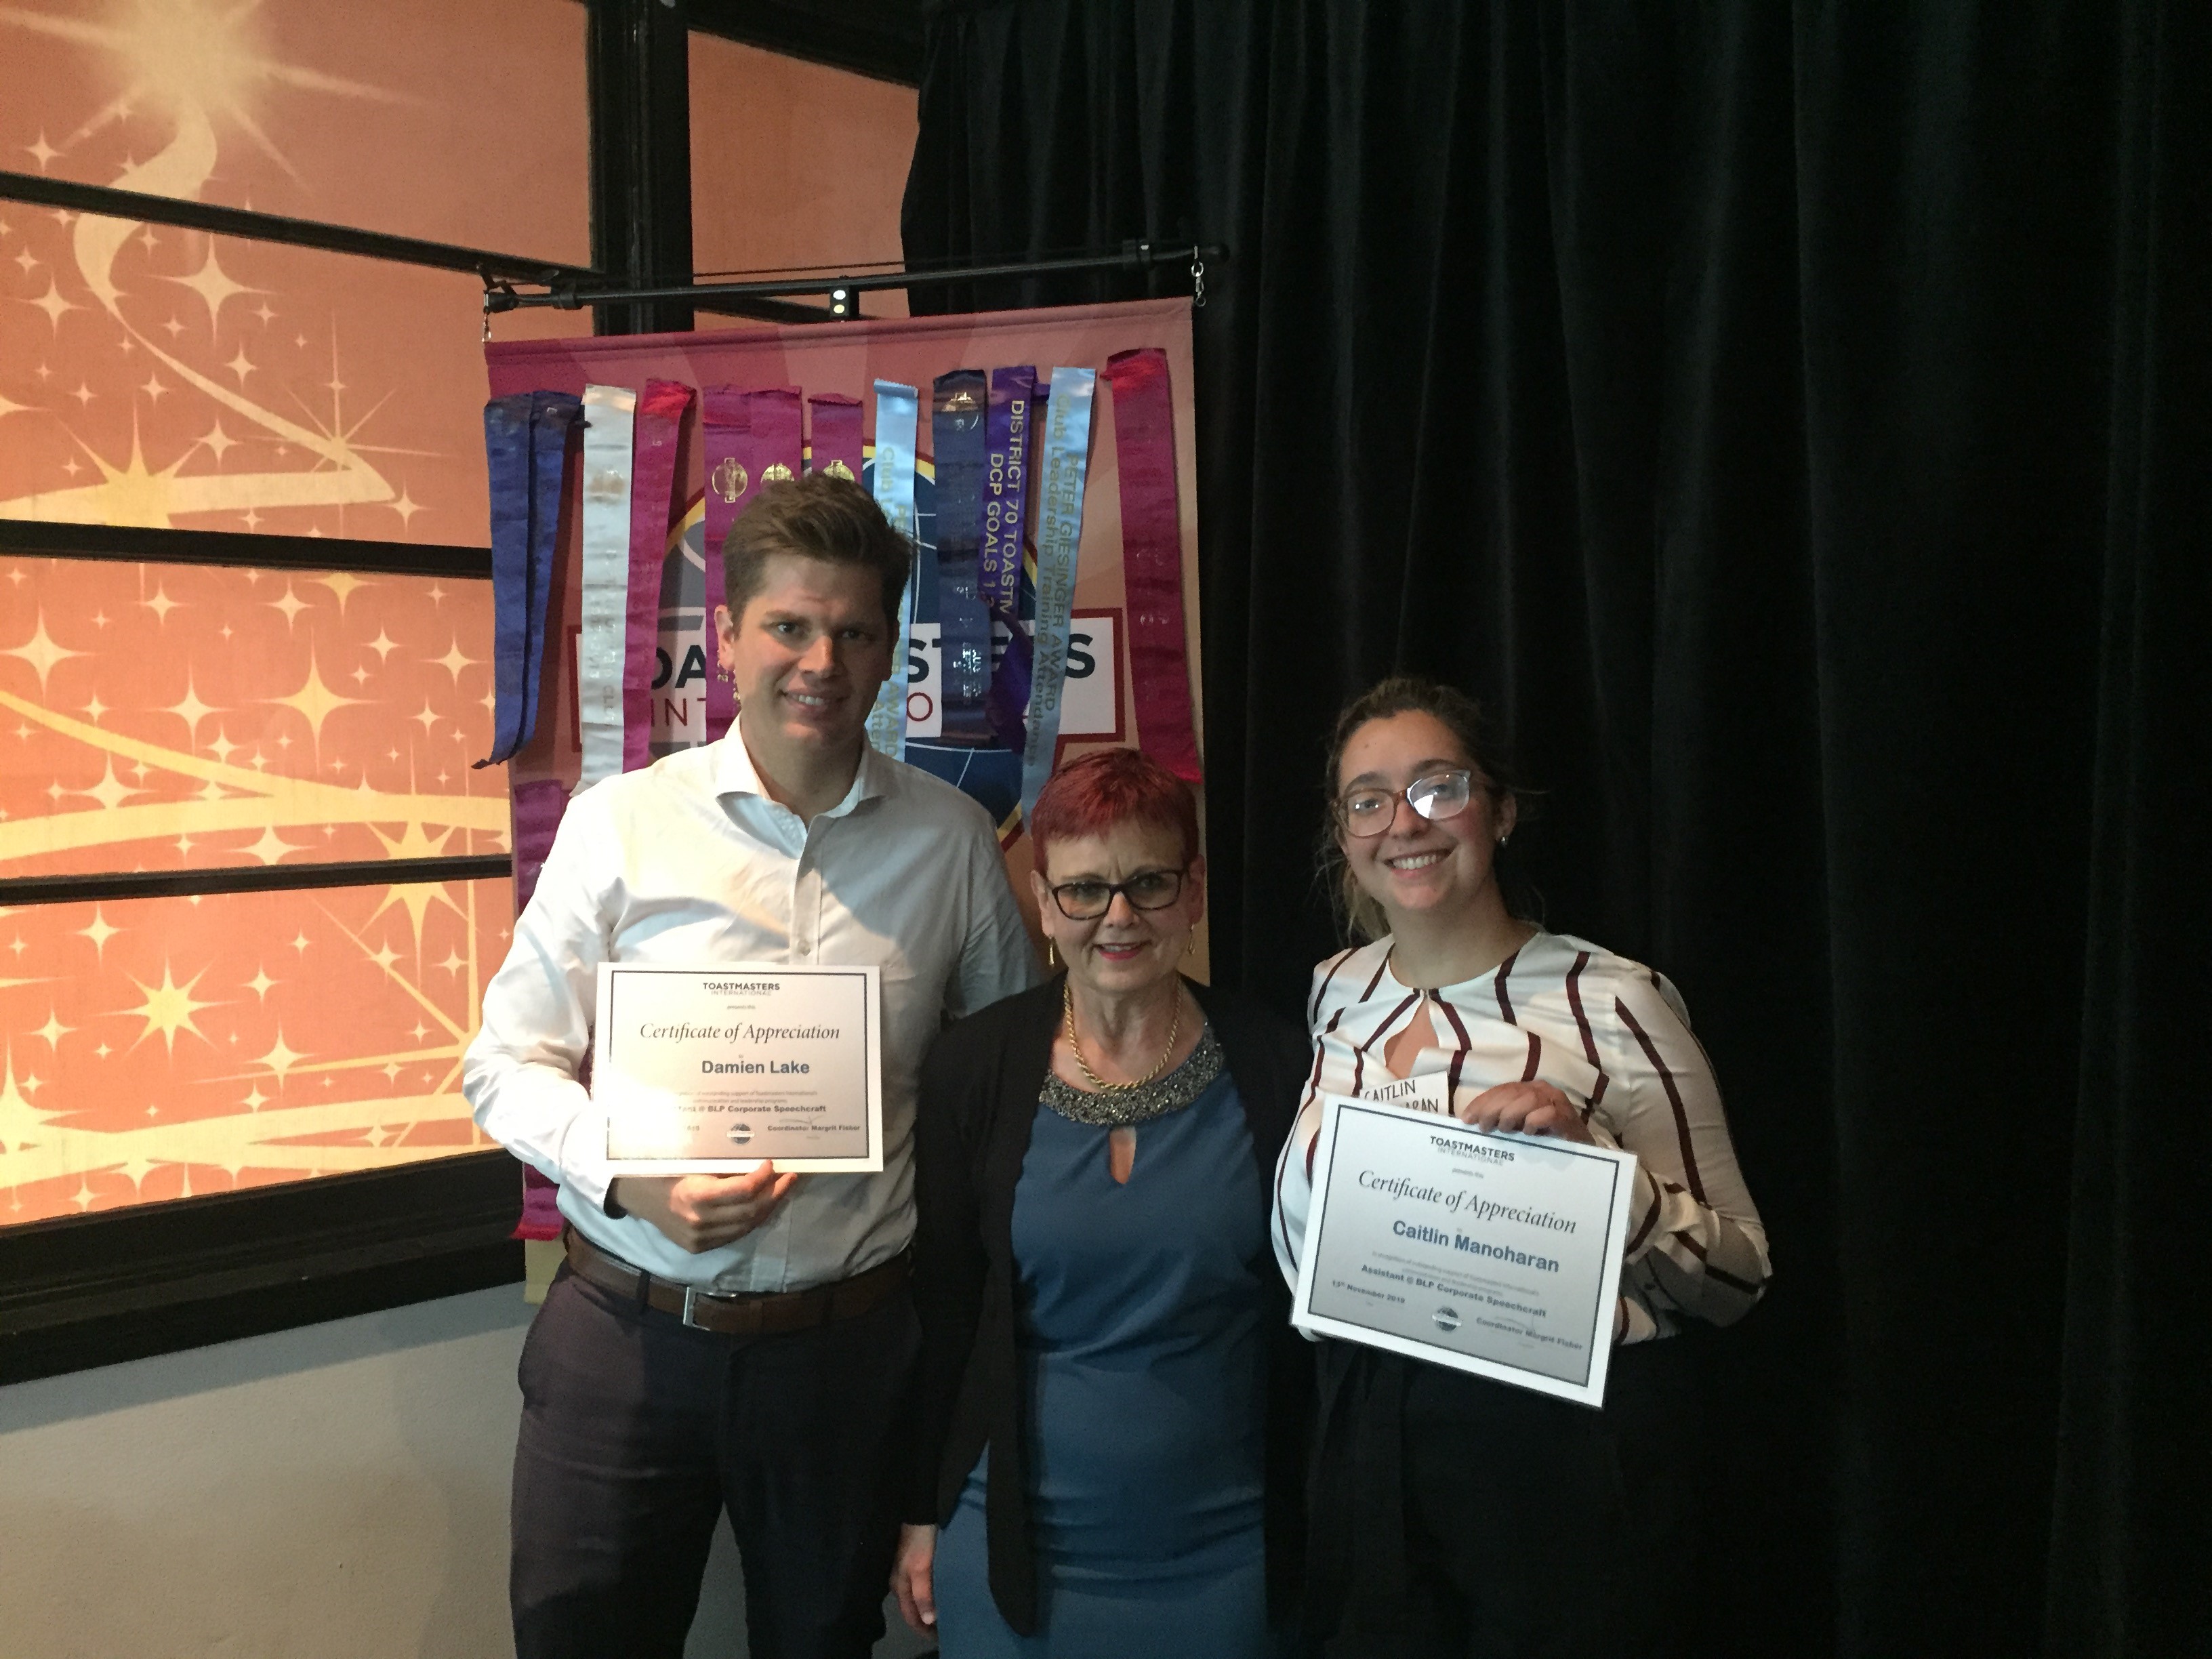 Damien Lake and Caitlin Manoharan certificates of appreciation for speechcraft by Margrit Fisher